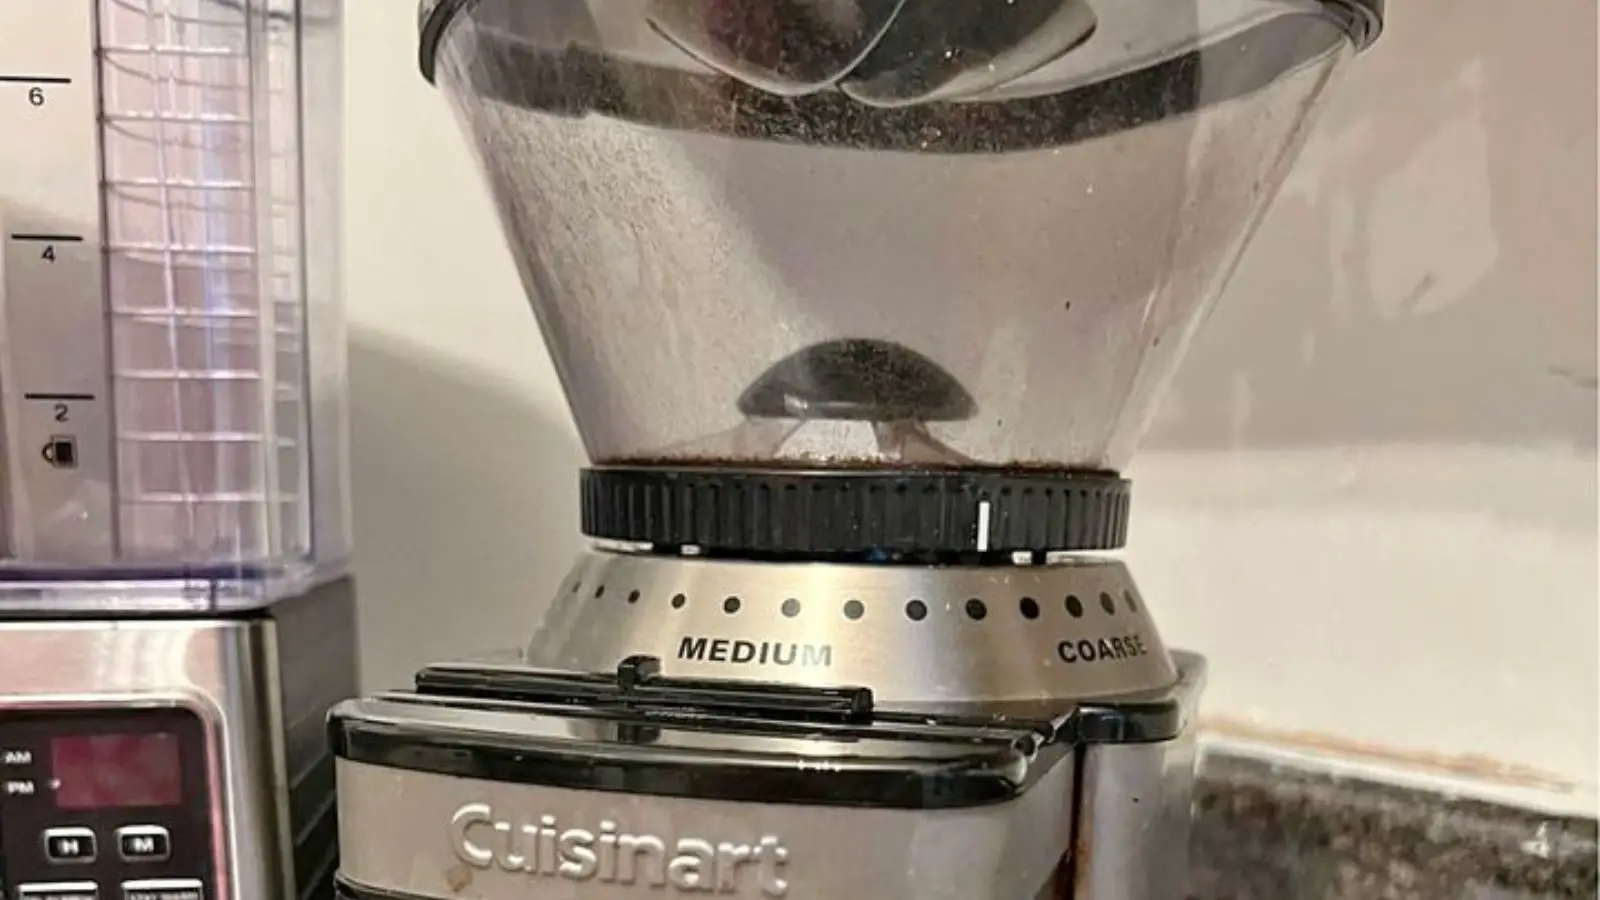 Cuisinart coffee maker machine grind and brew - familyguidecentral.com